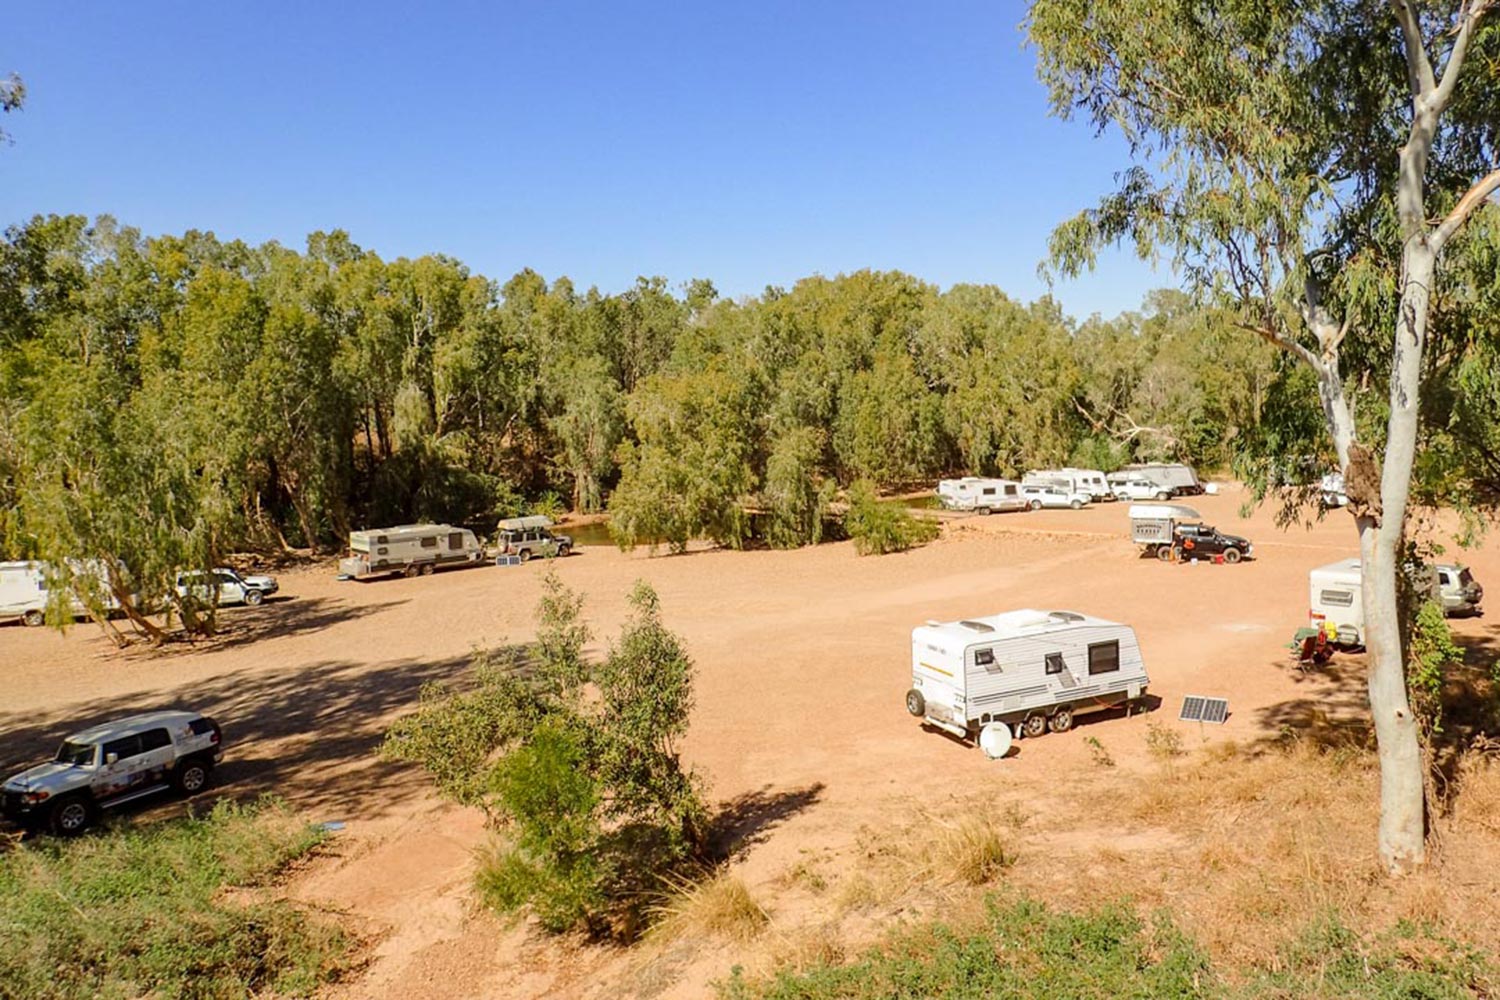 Broad and open campsite on the Gregory River